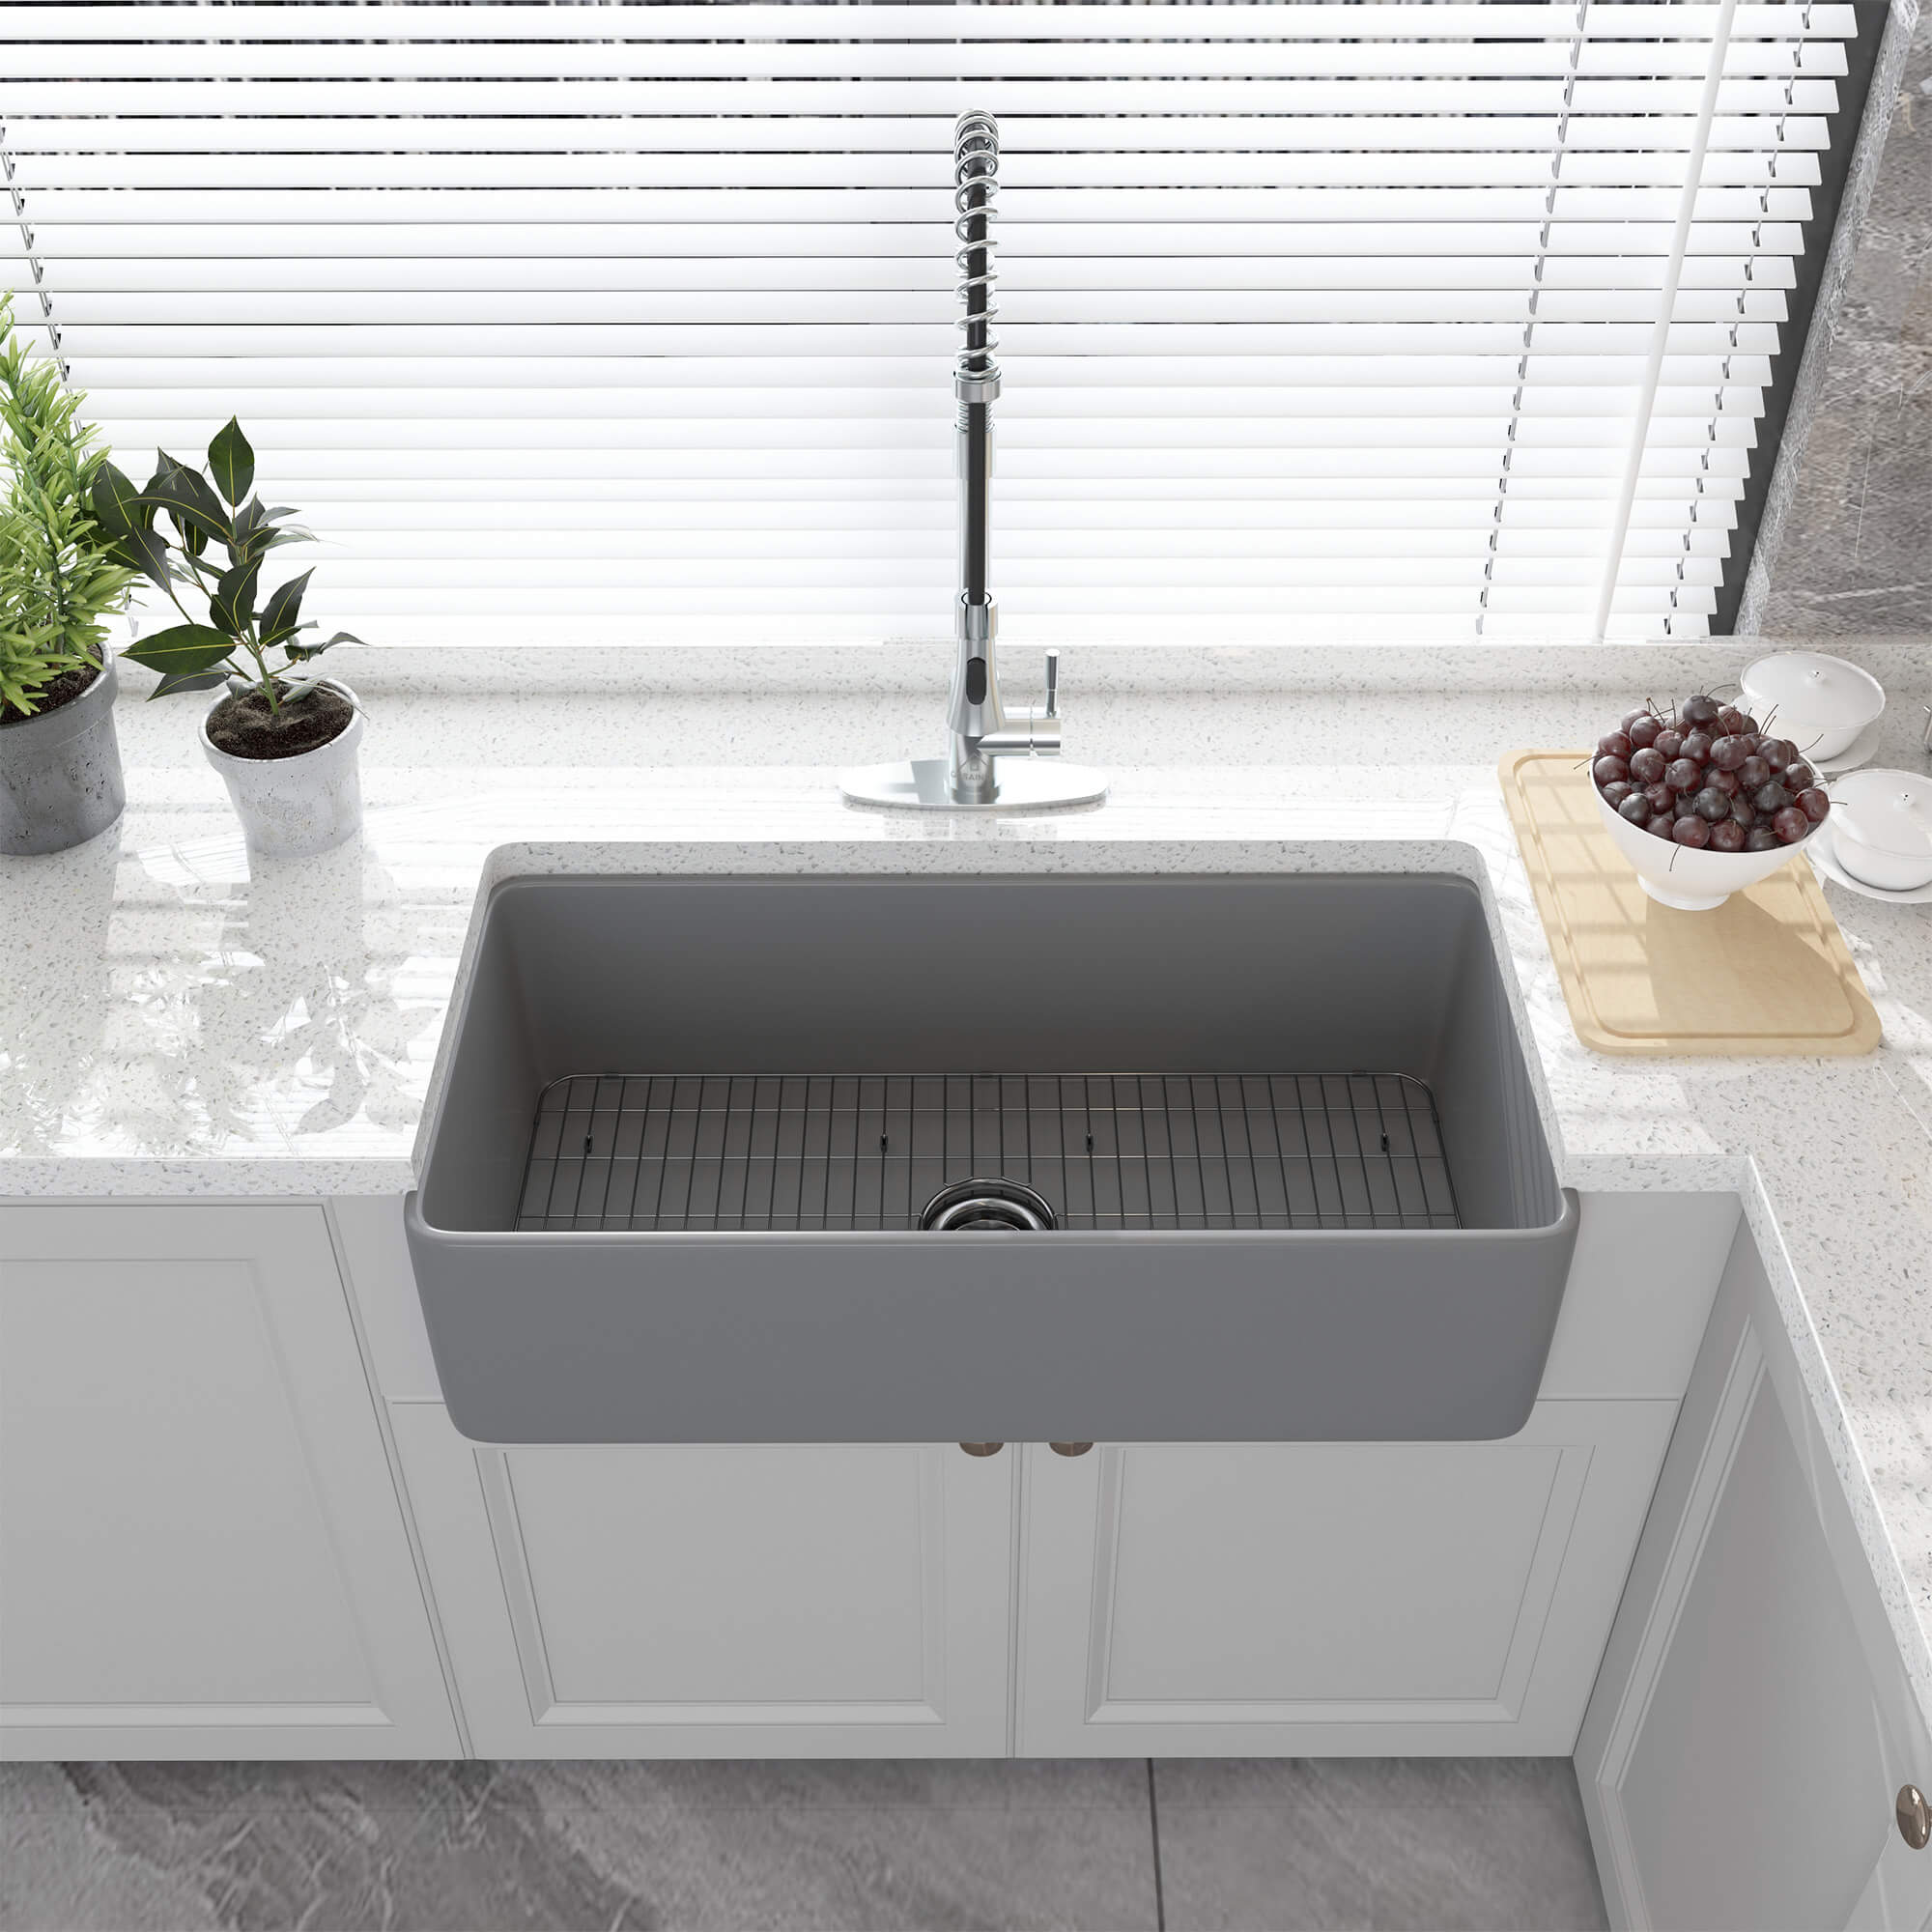 https://img-va.myshopline.com/image/store/2000019301/1616580841581/CASAINC-Fireclay-36-in-Single-Bowl-Farmhouse-Apron-Kitchen-Sink-with-Bottom-Grid-and-Strainers-With-cUPC-Certified,-in-Matte-Gray-(4).jpeg?w=2000&h=2000